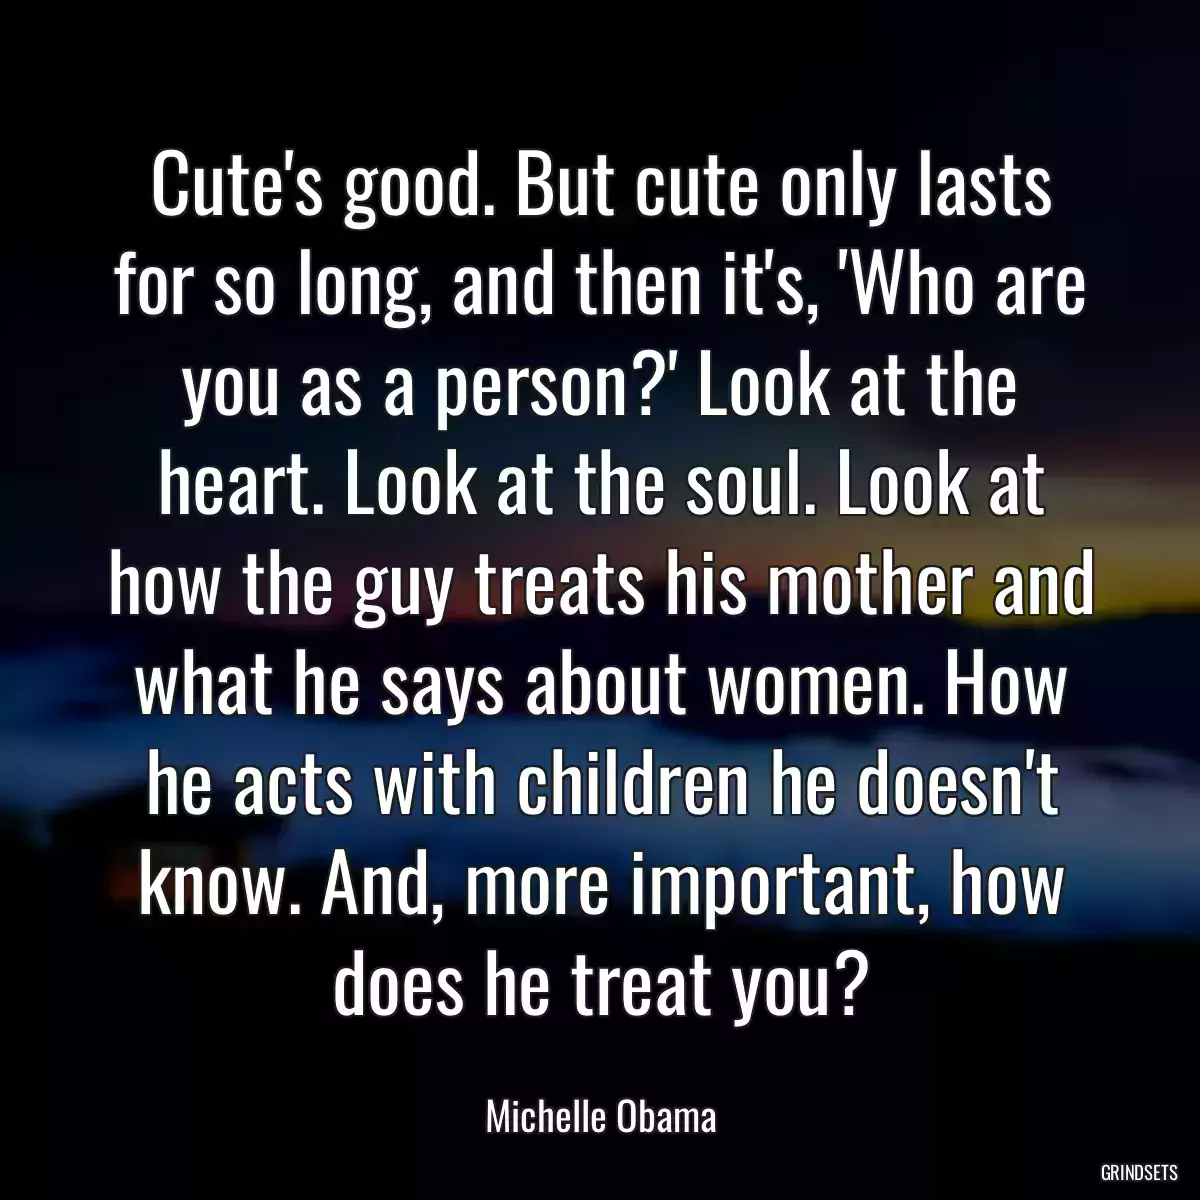 Cute\'s good. But cute only lasts for so long, and then it\'s, \'Who are you as a person?\' Look at the heart. Look at the soul. Look at how the guy treats his mother and what he says about women. How he acts with children he doesn\'t know. And, more important, how does he treat you?